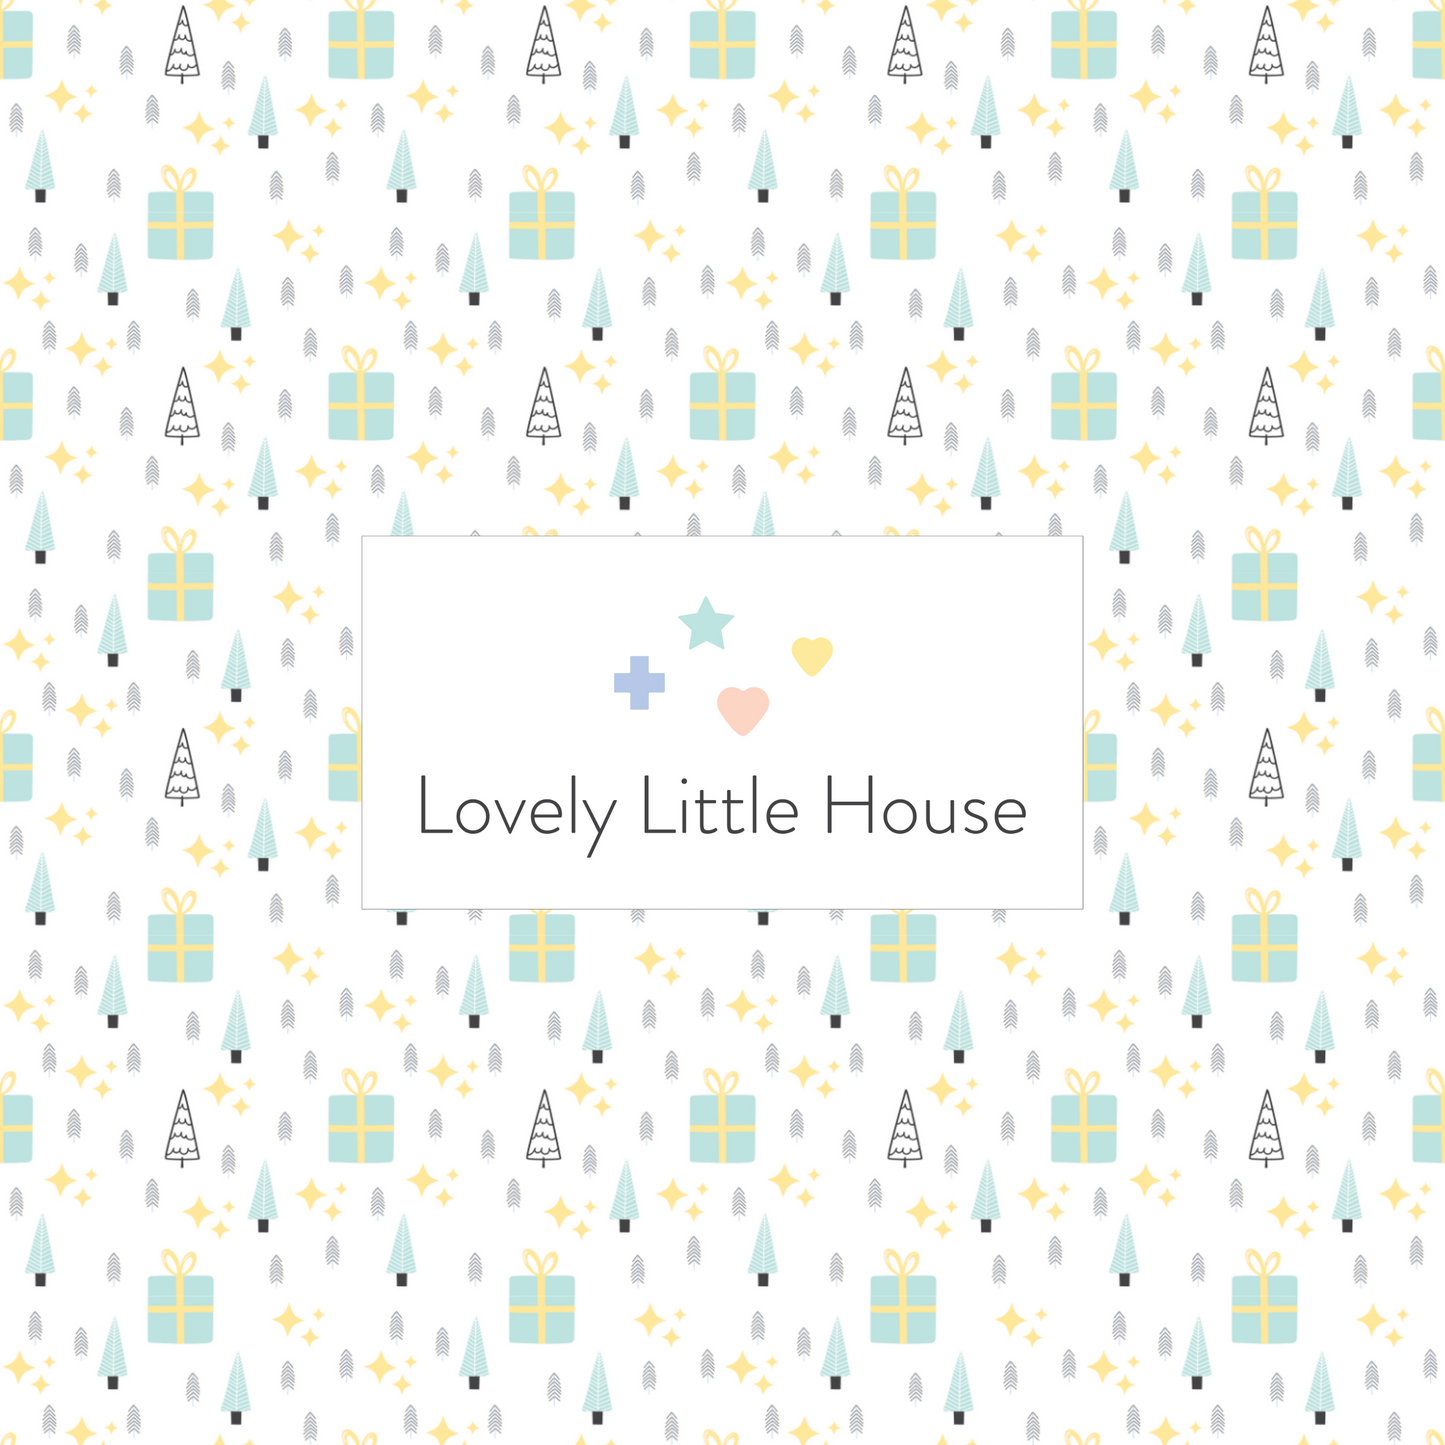 A dollhouse wallpaper pattern of Christmas Trees and Gifts in mint and yellow